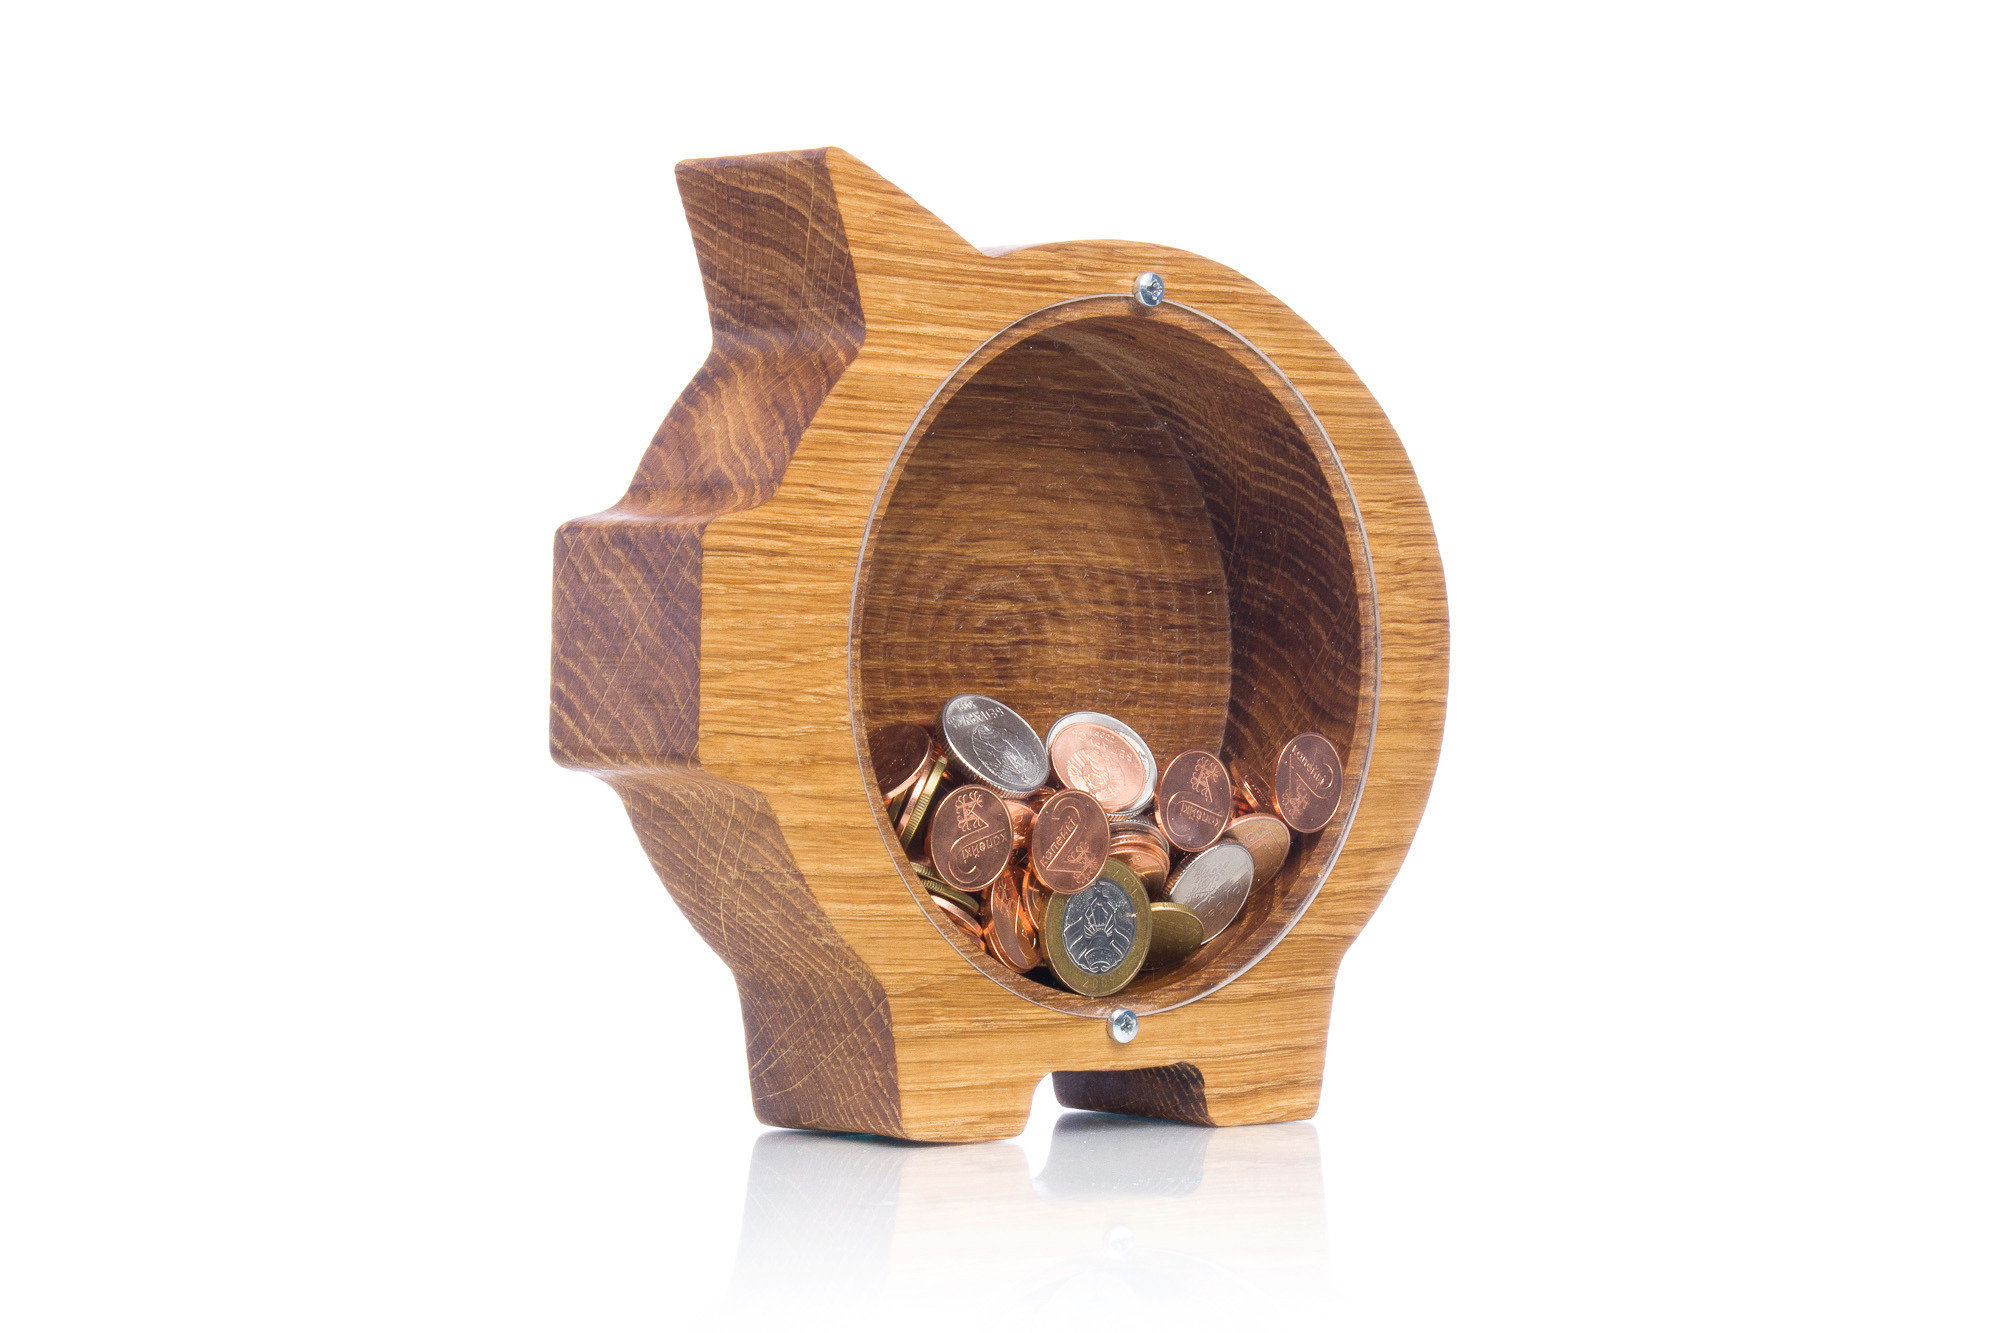 piggy bank with glass side showing coins inside